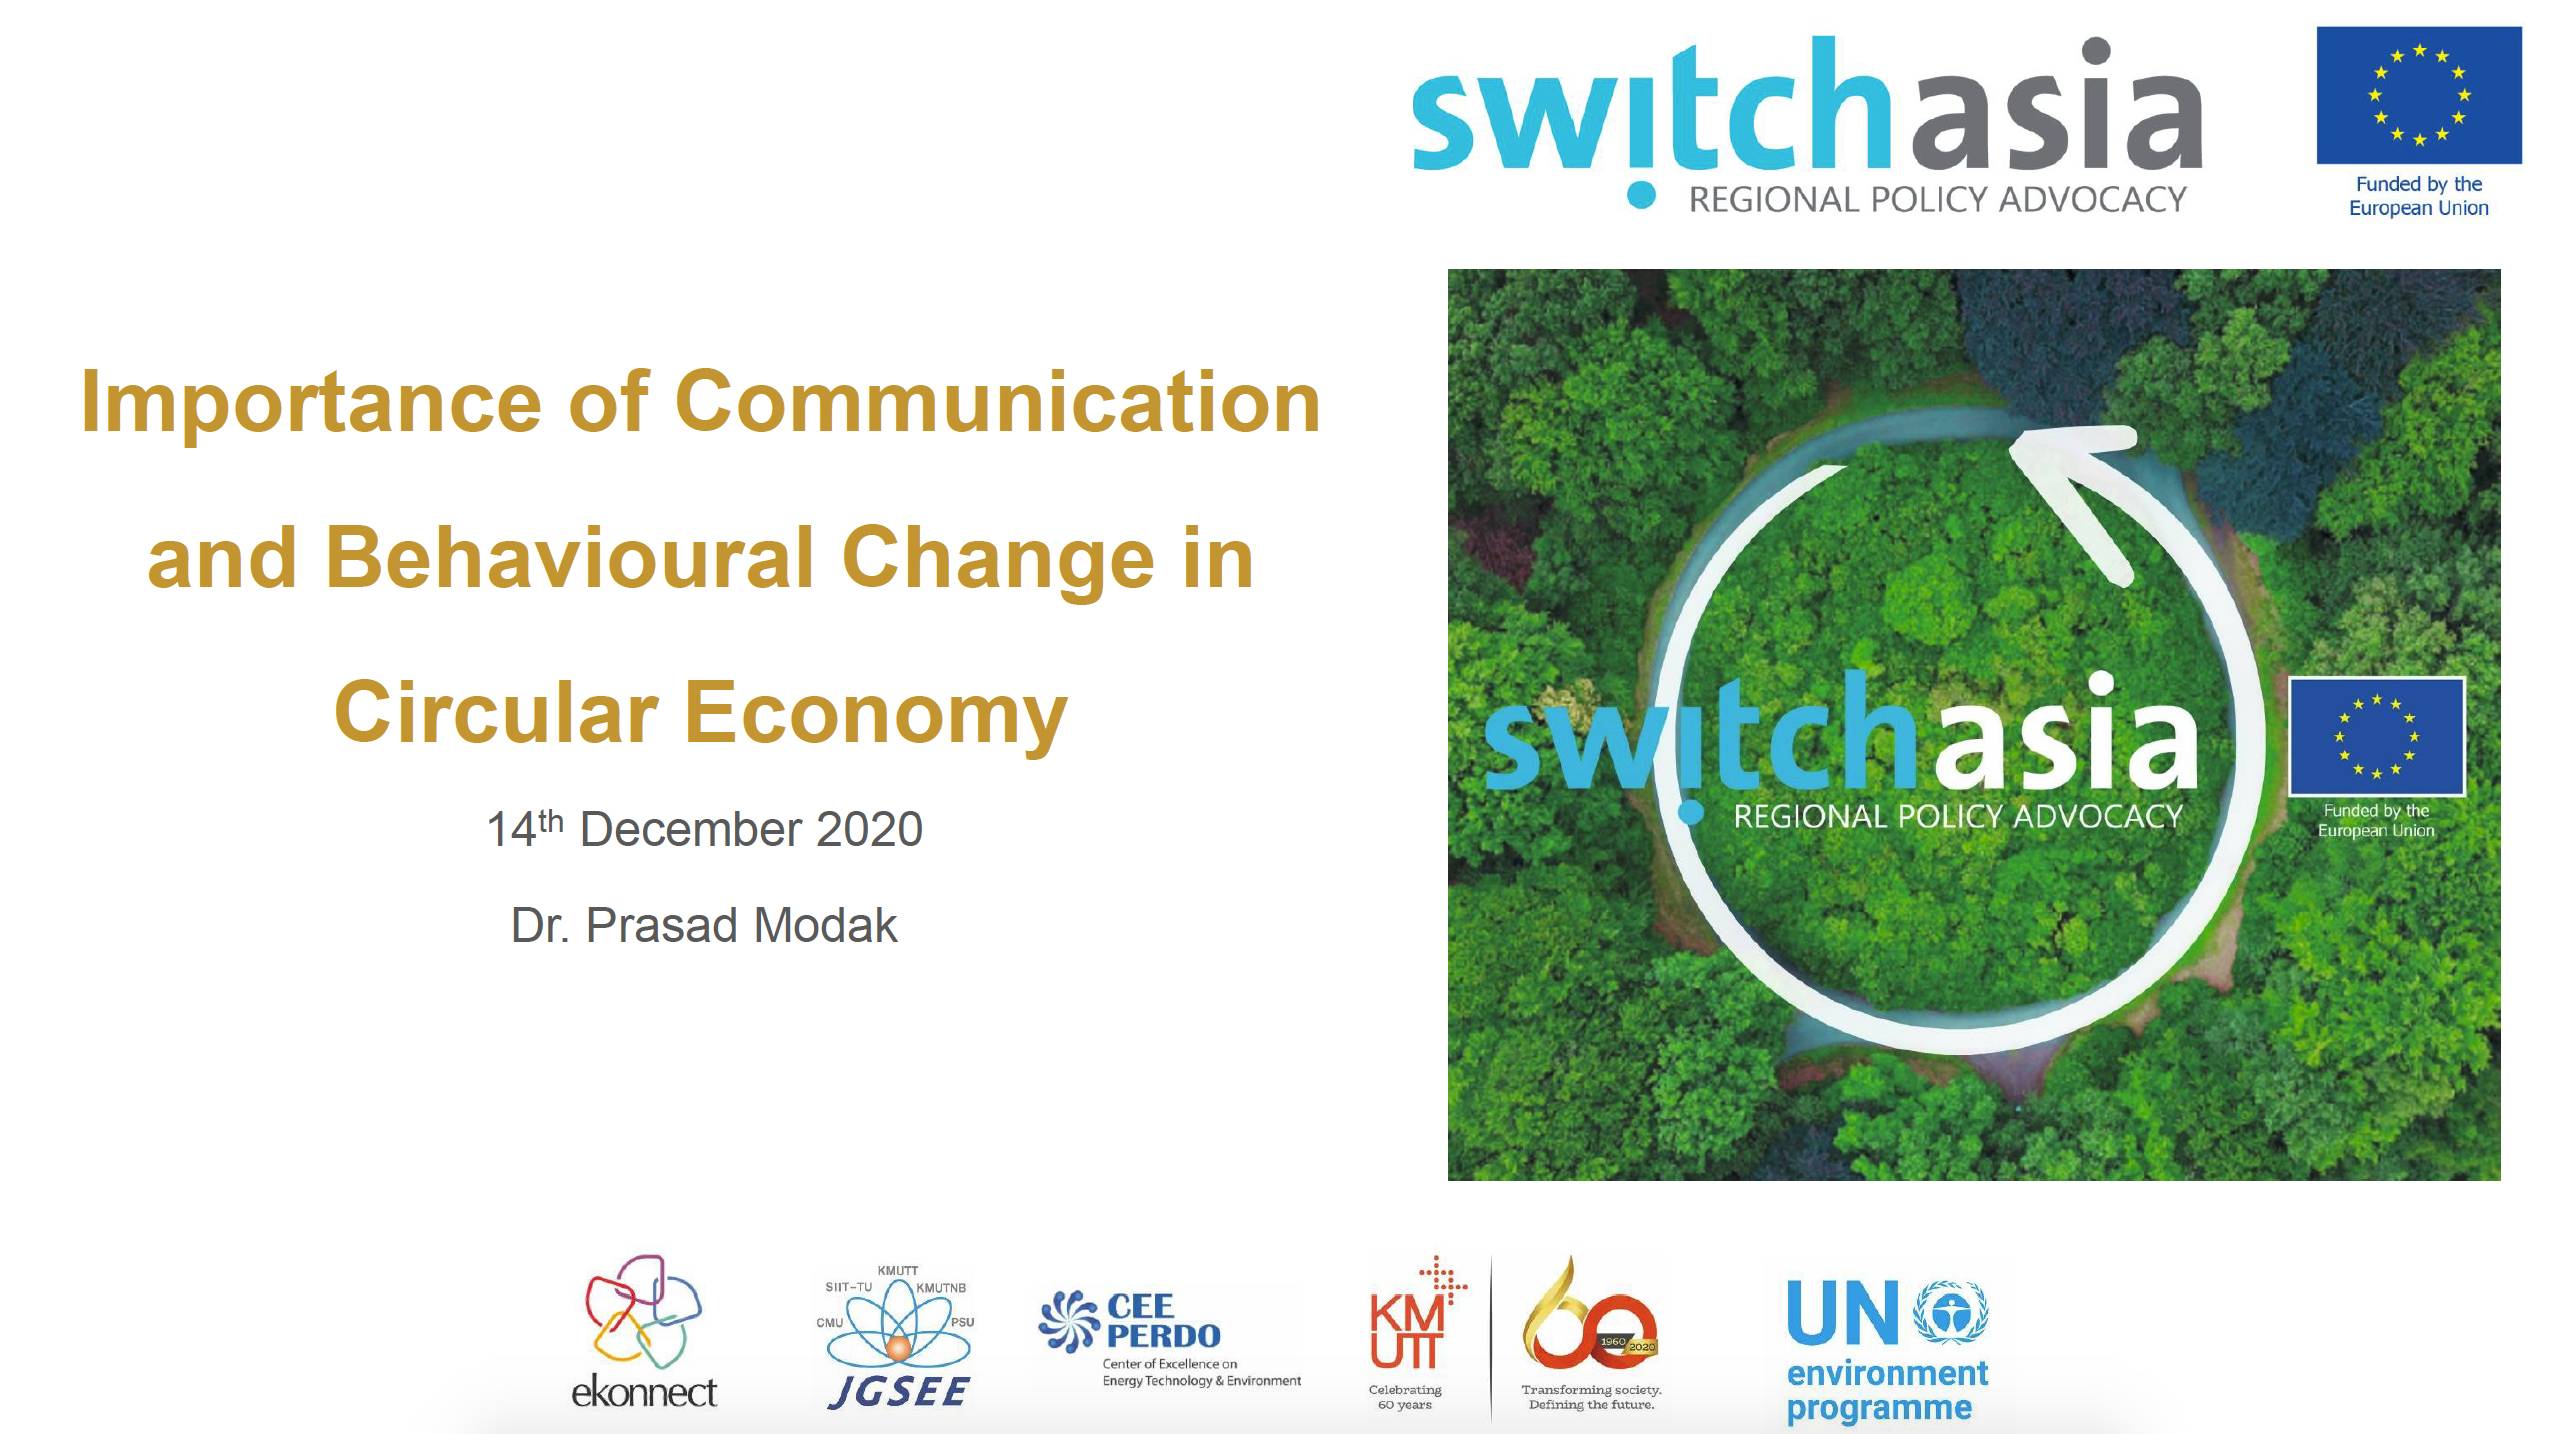 Importance of Communication and Behavioural Change in Circular Economy